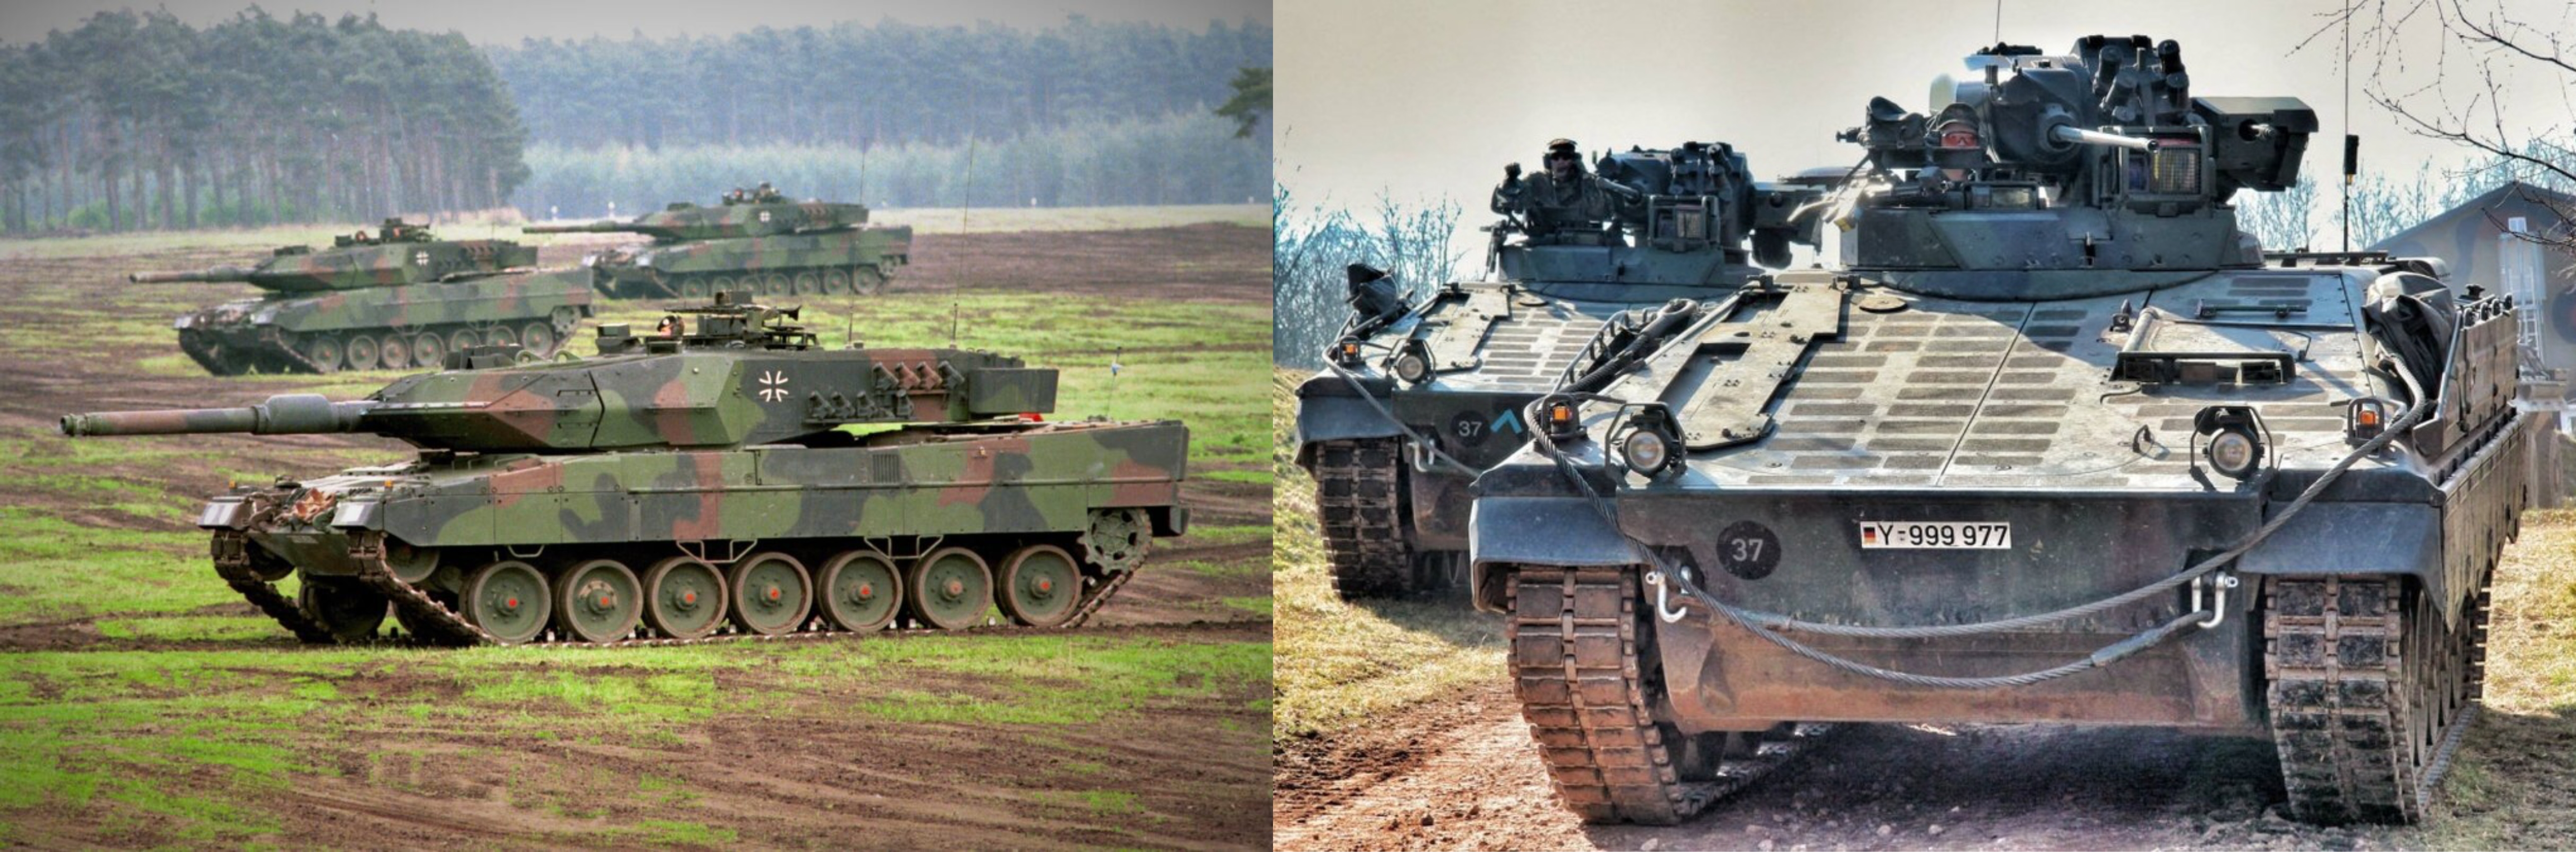 Media: Ukraine asks Germany for more Leopard 2 tanks and Marder infantry fighting vehicles